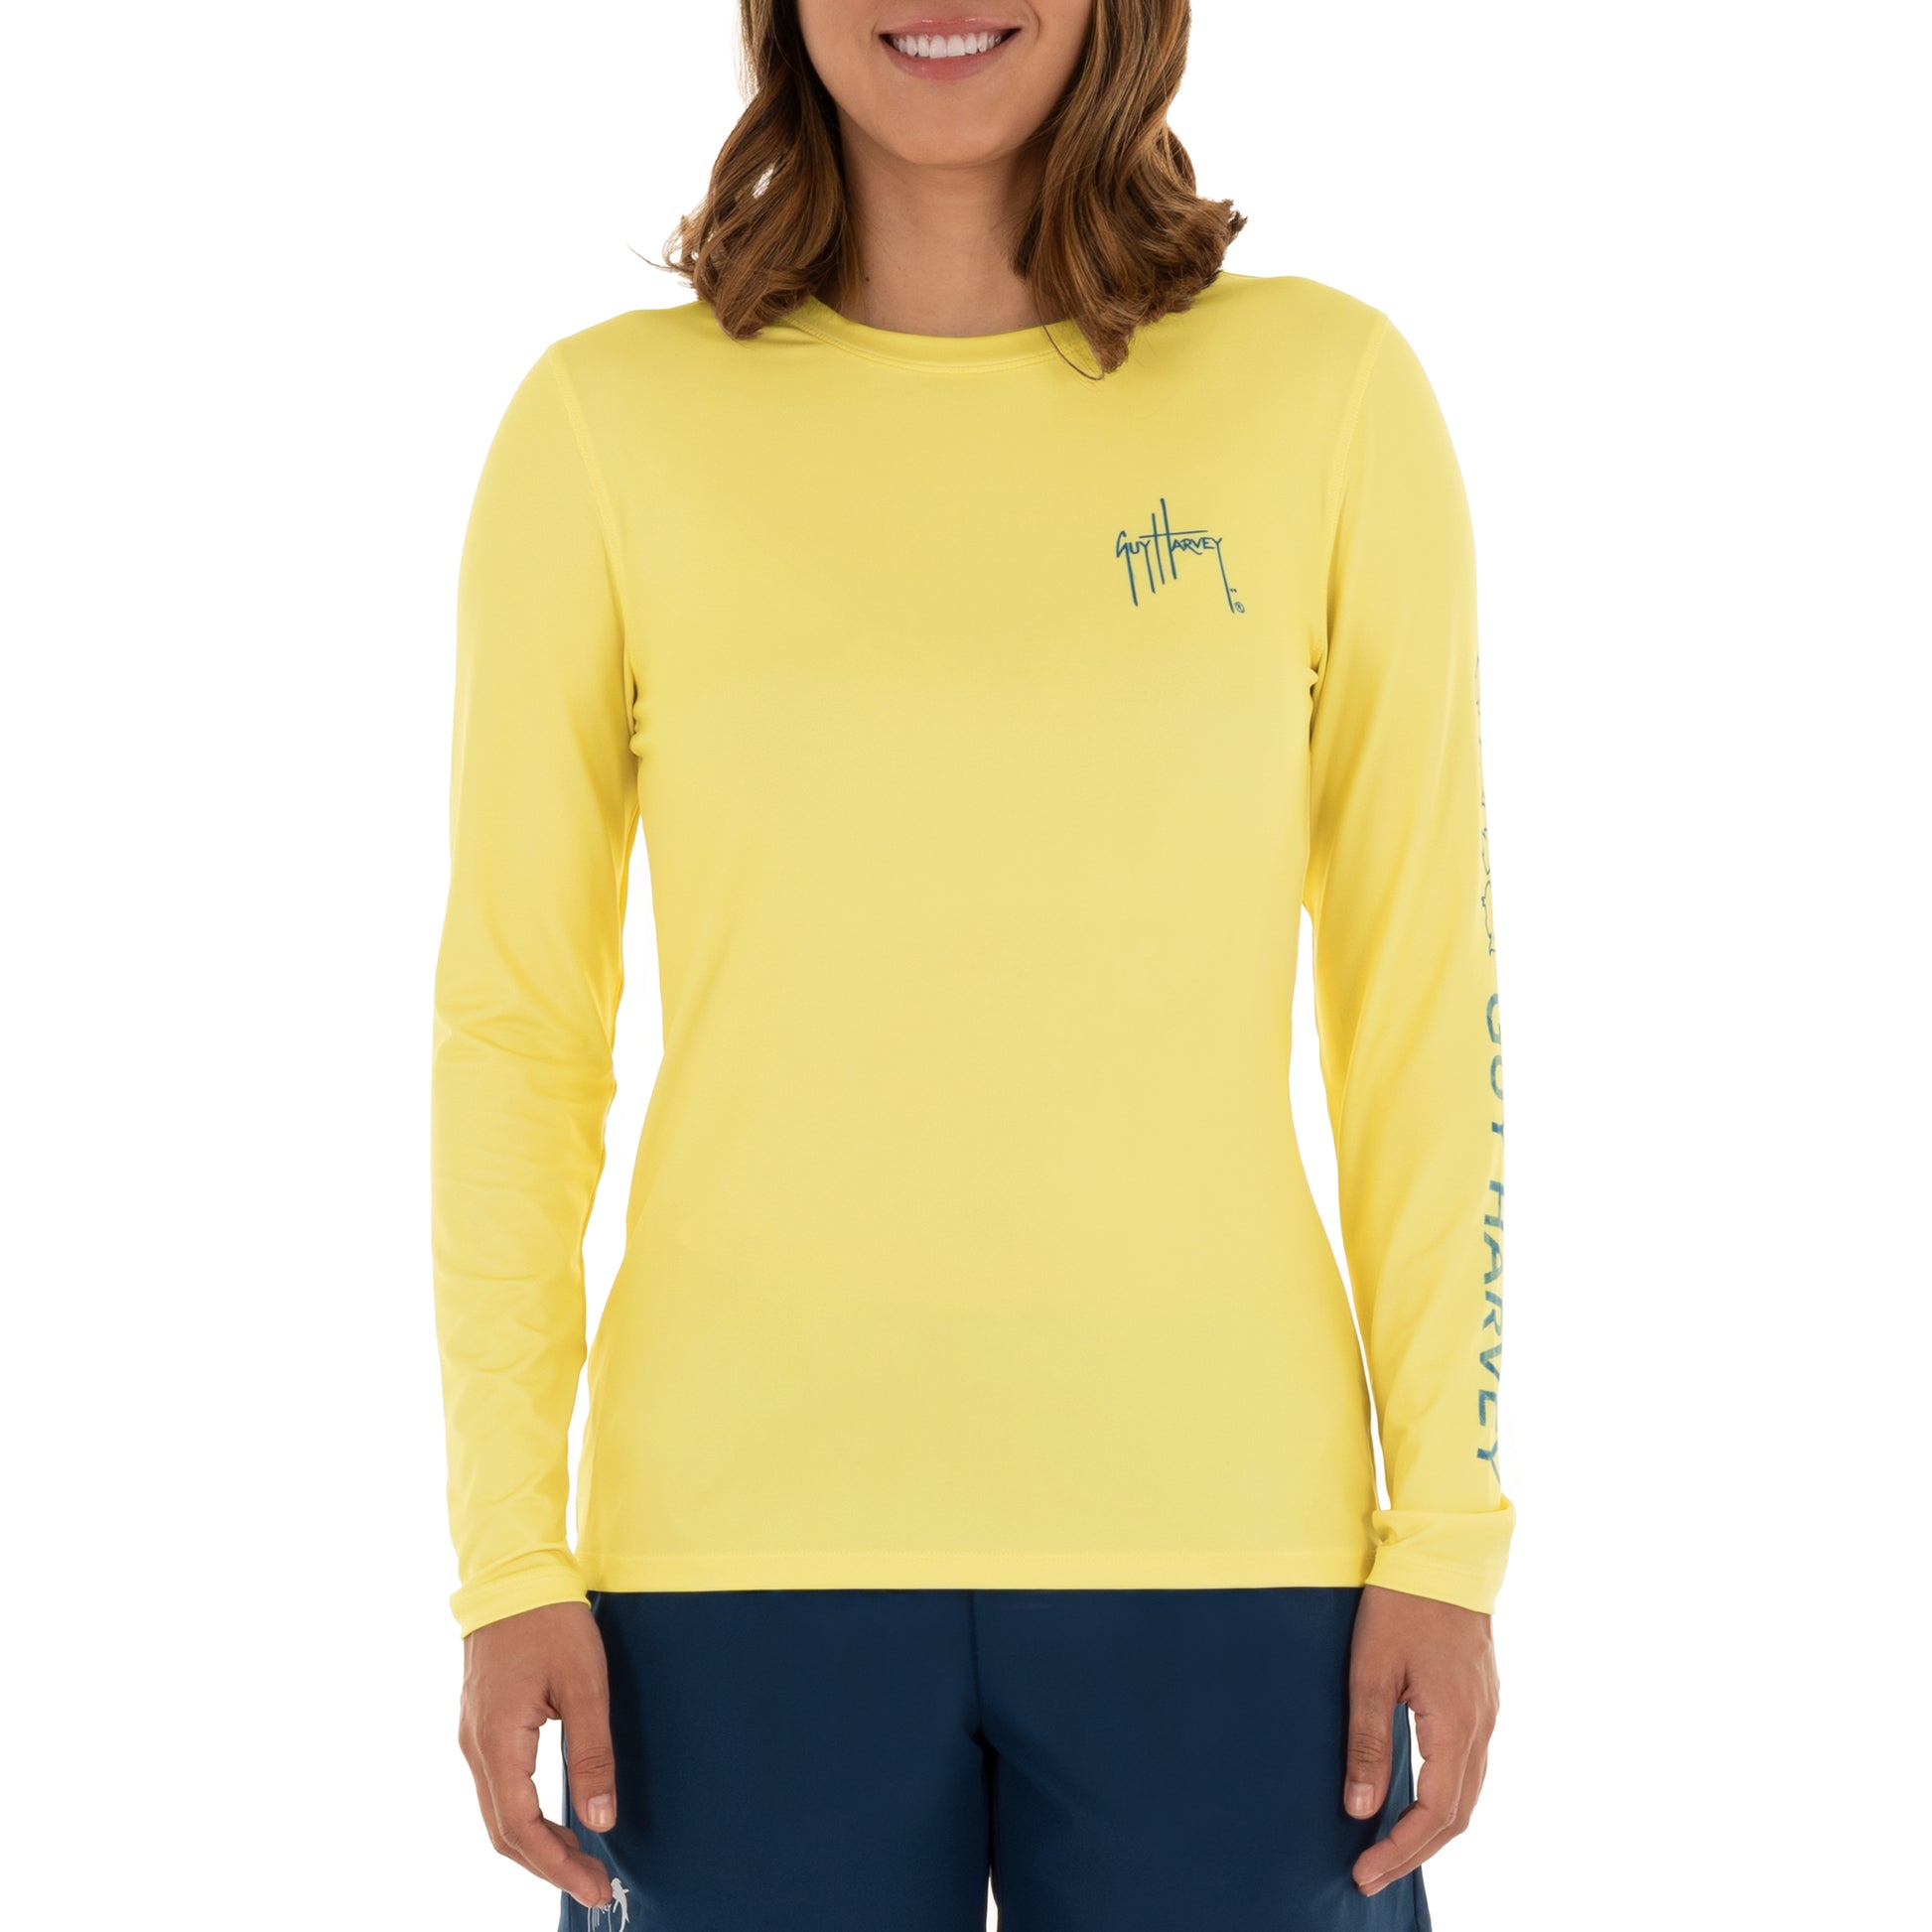 Ladies Core Solid Yellow Sun Protection Top View 3